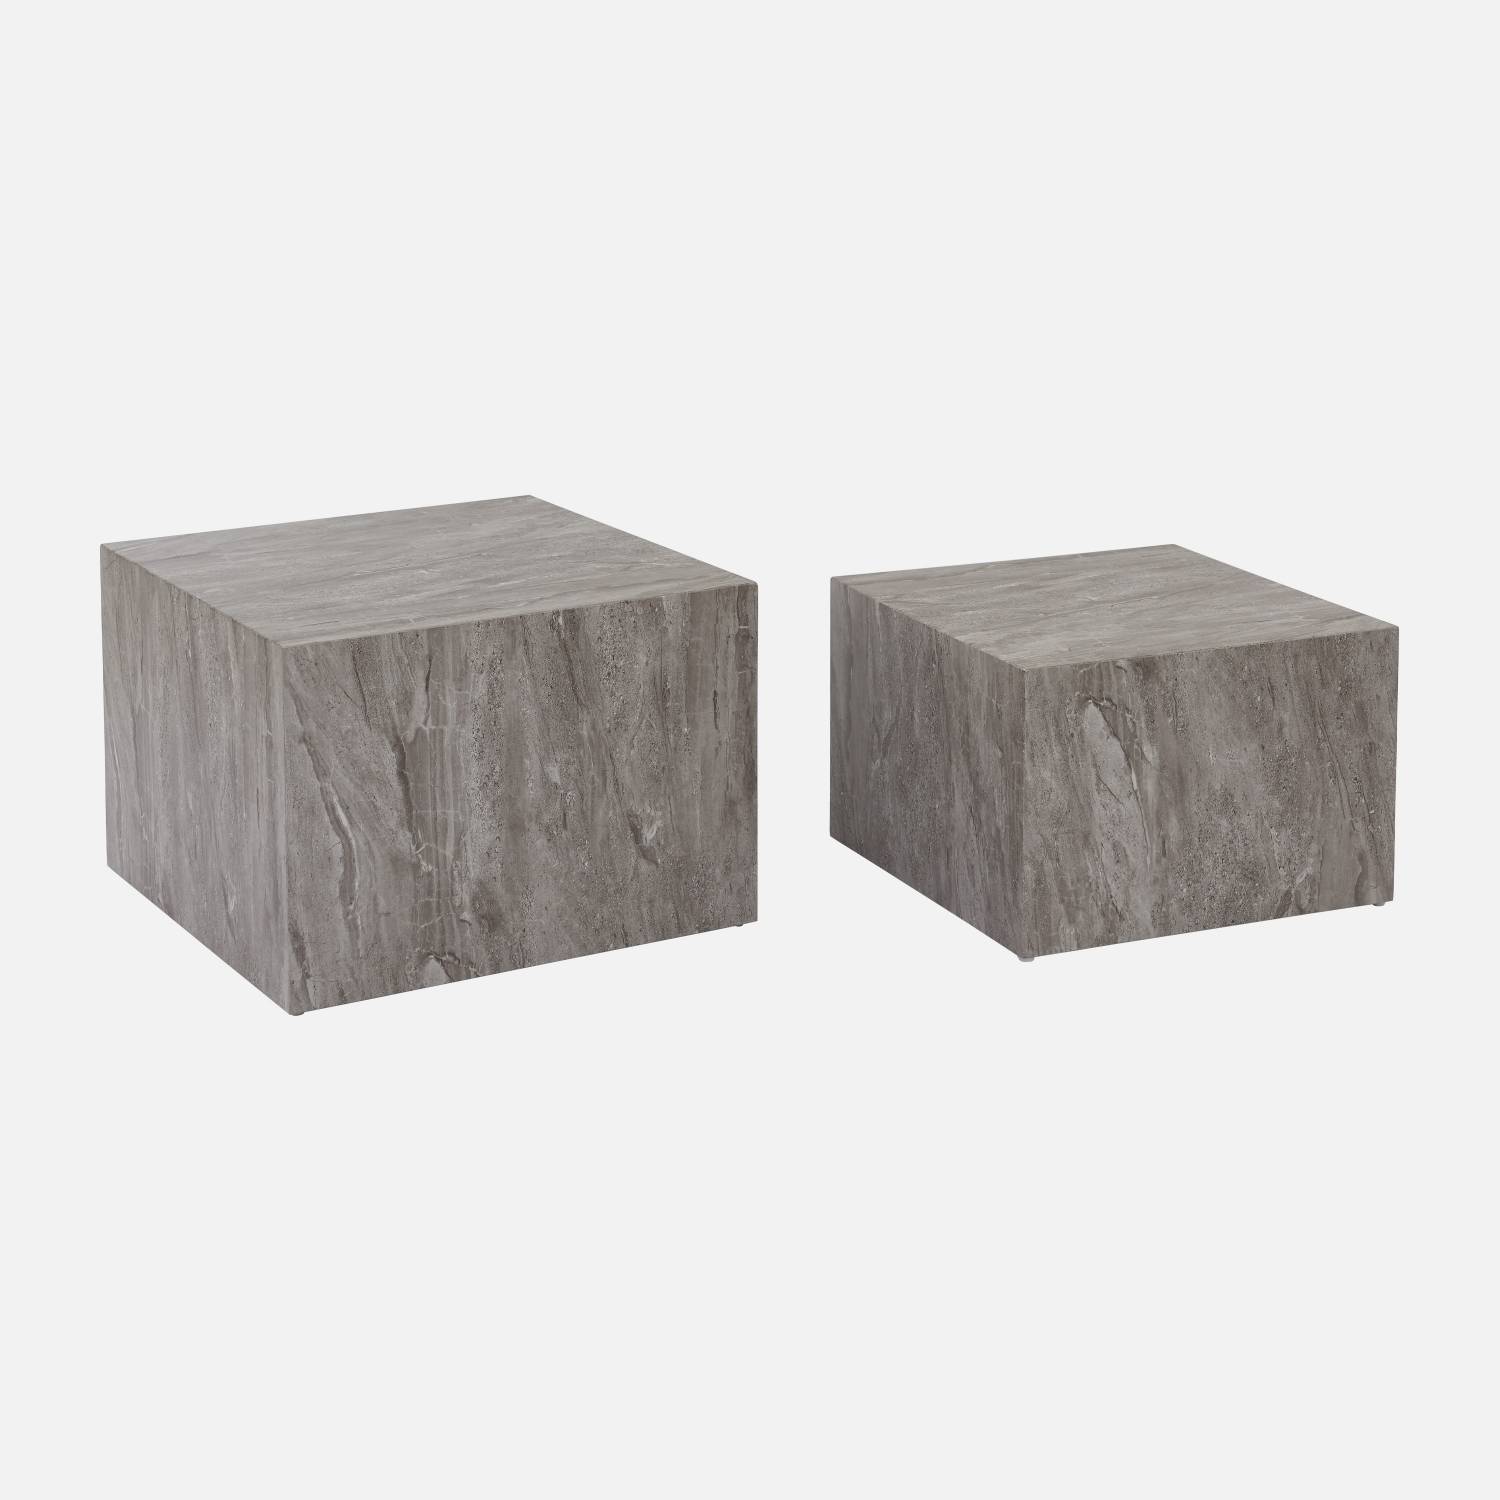 Set of 2 square coffee tables with marble effect, grey